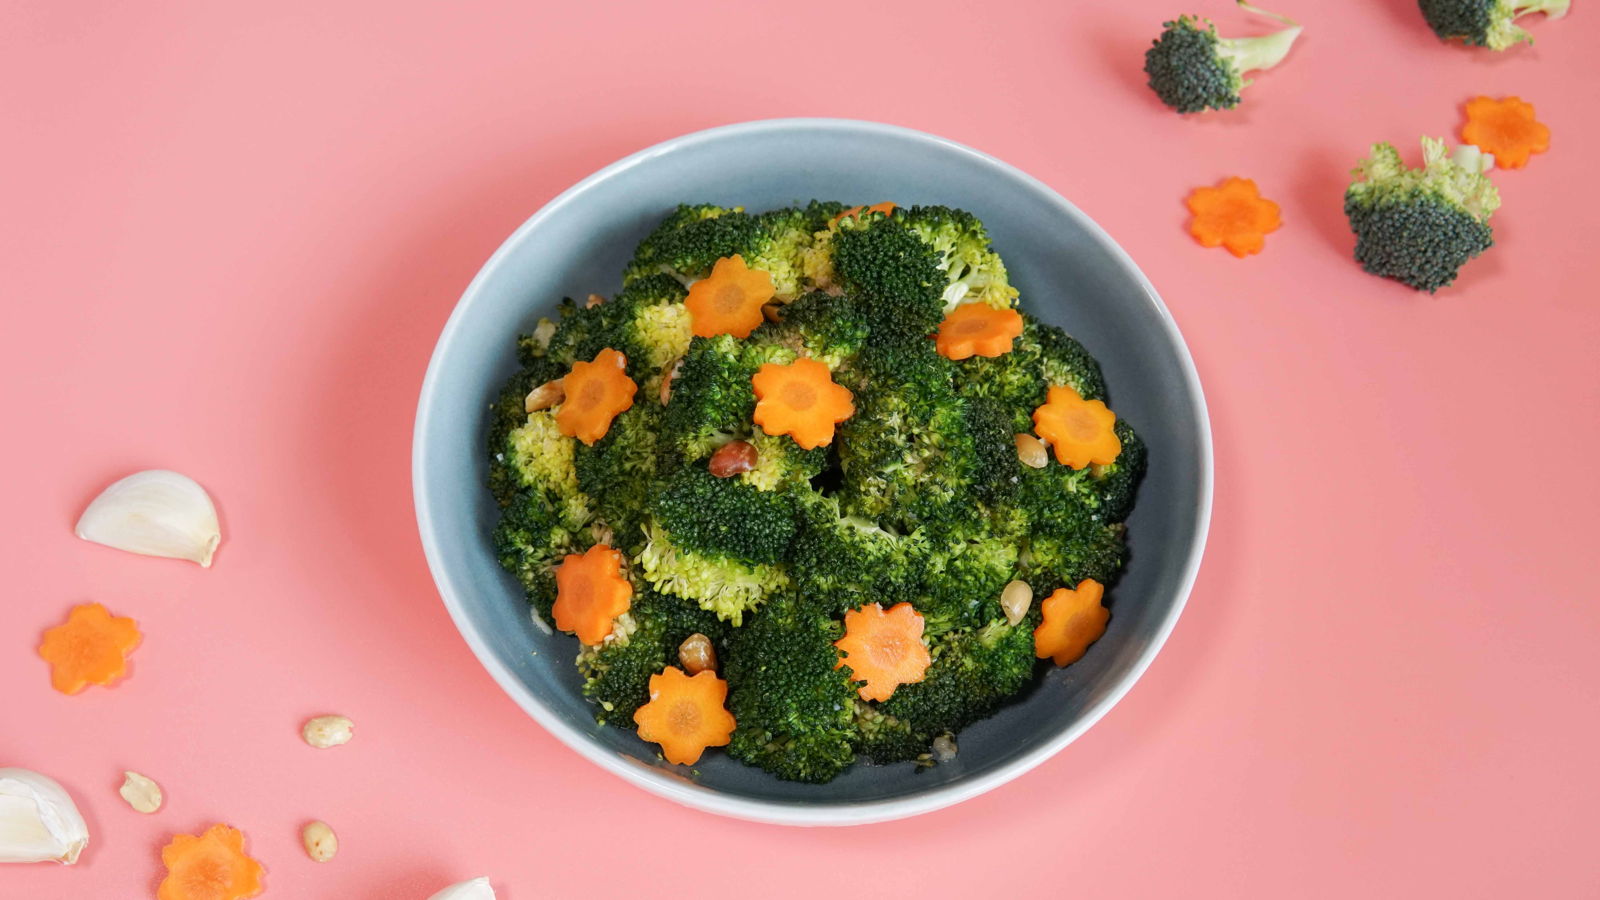 Steamed Broccoli and Carrots